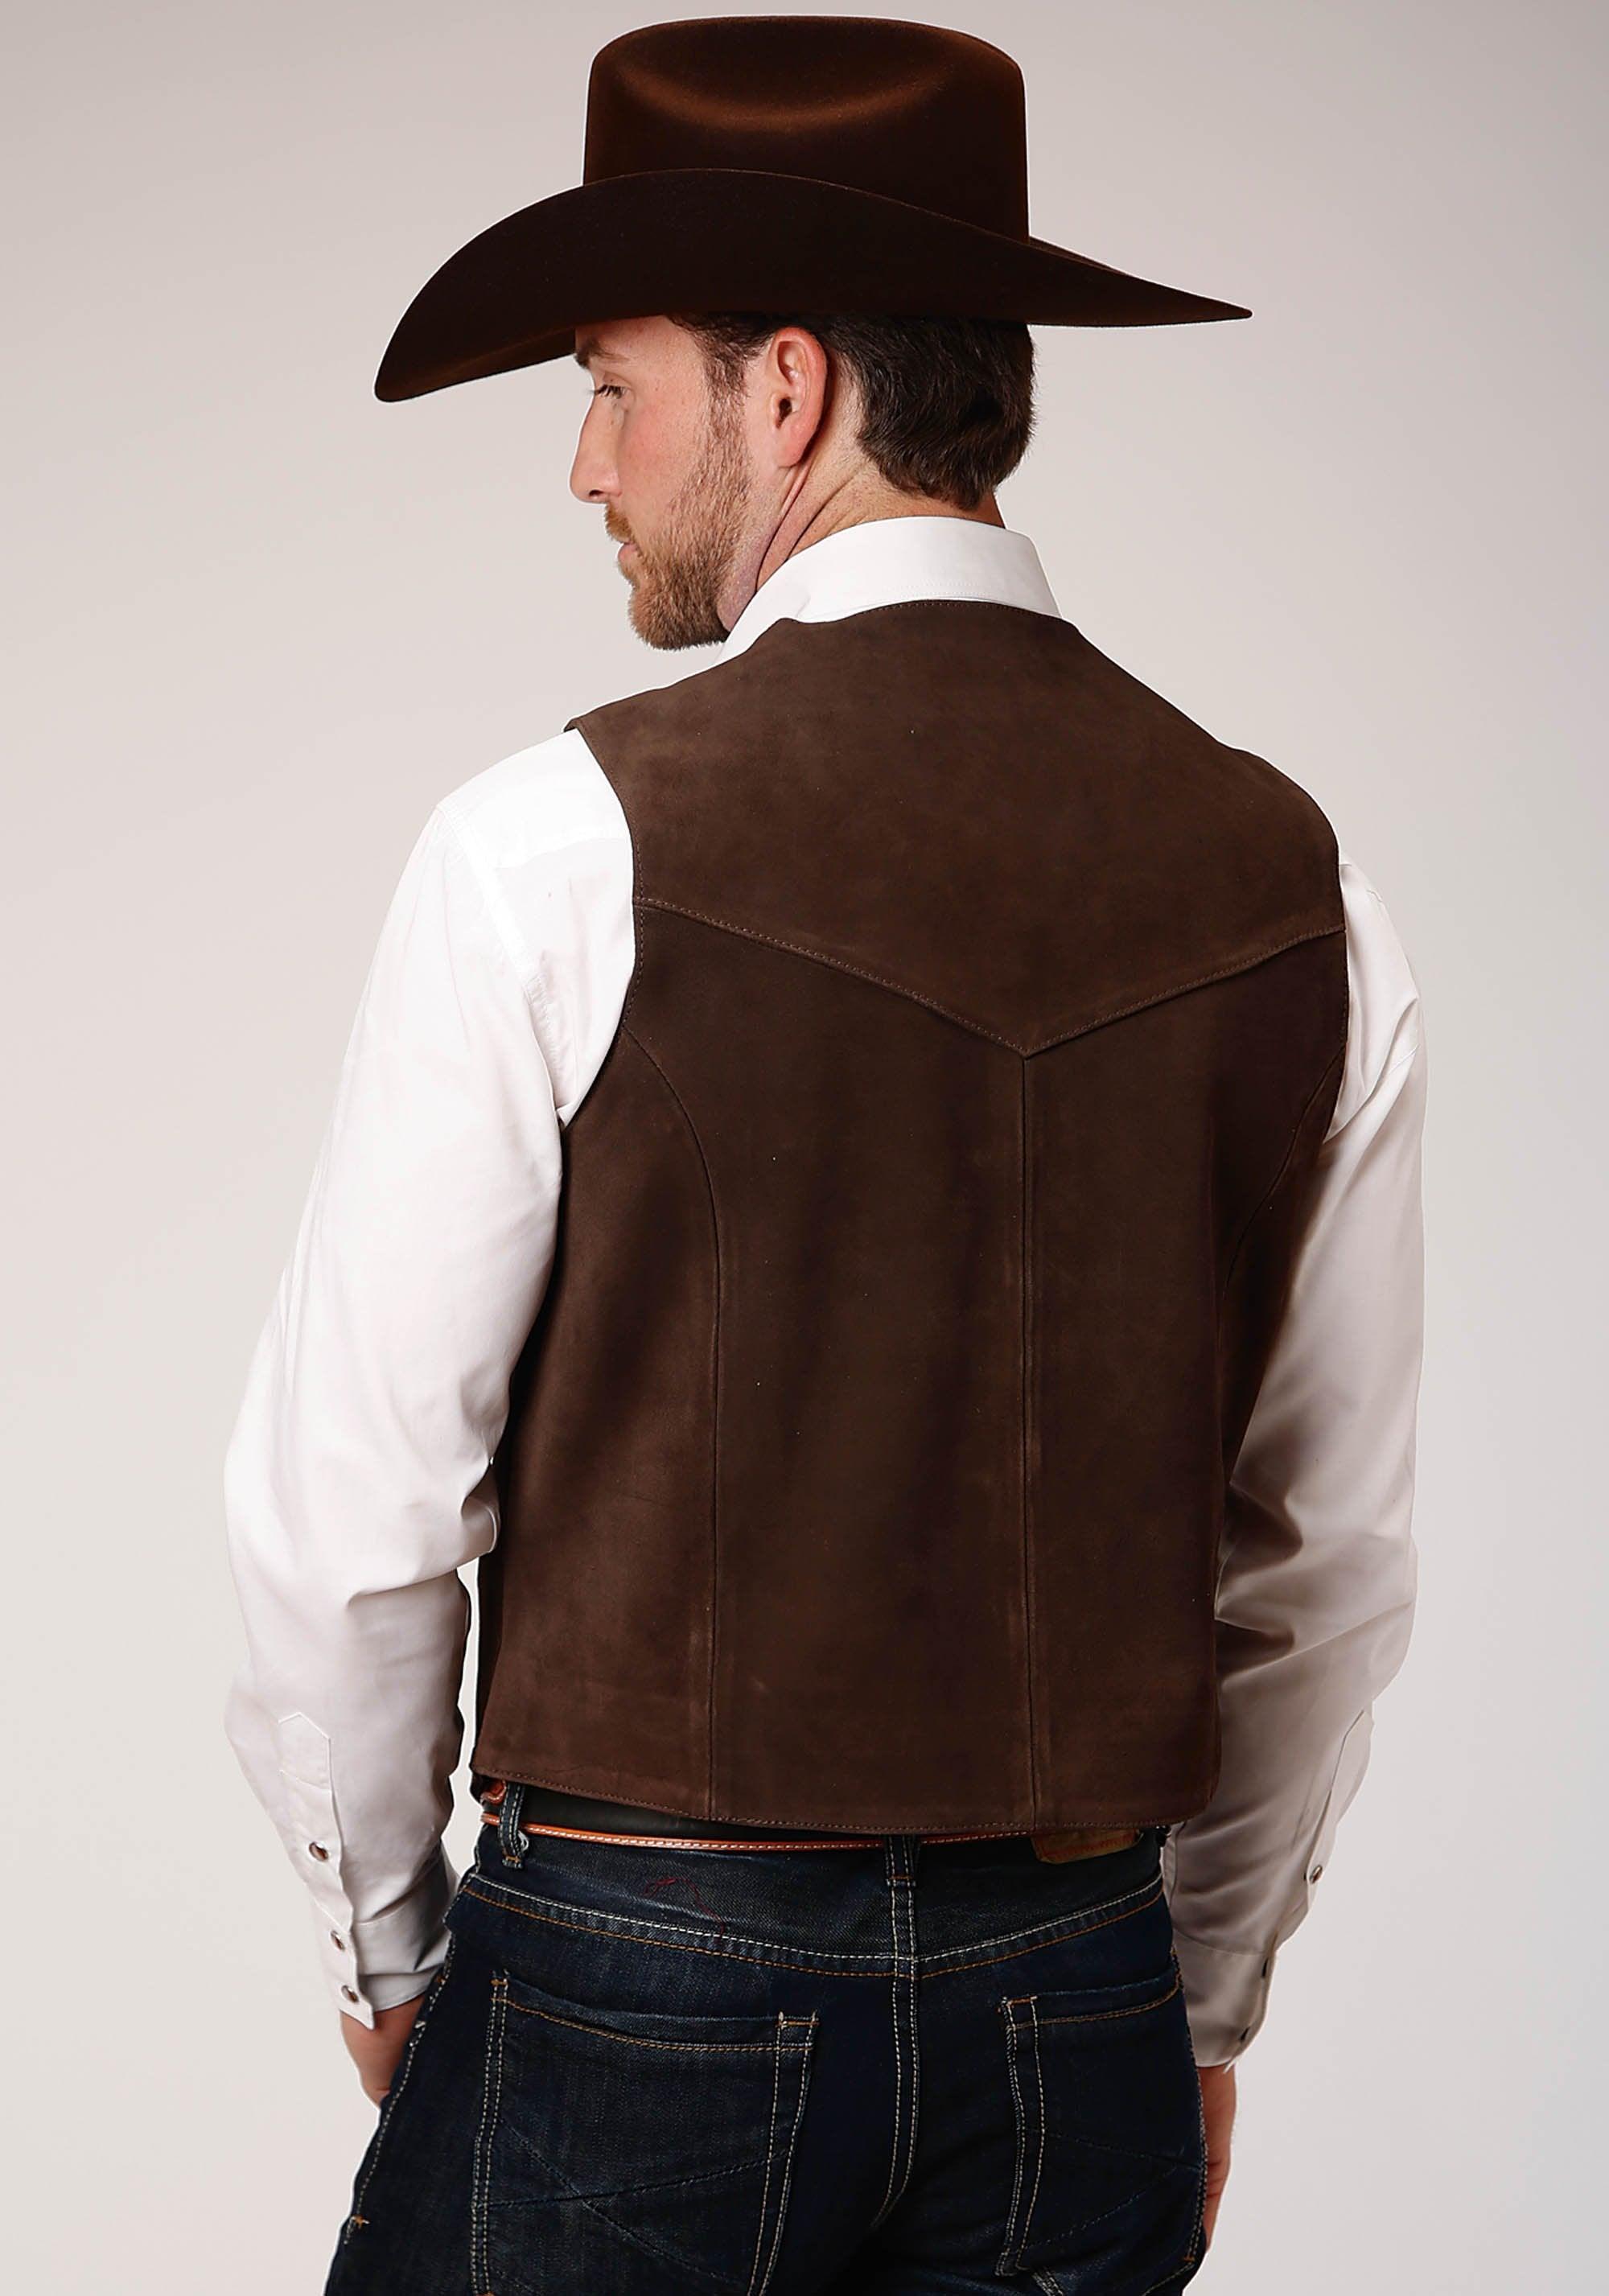 ROPER MENS BROWN SUEDE LEATHER VEST WITH WESTERN FRONT YOKES - Flyclothing LLC